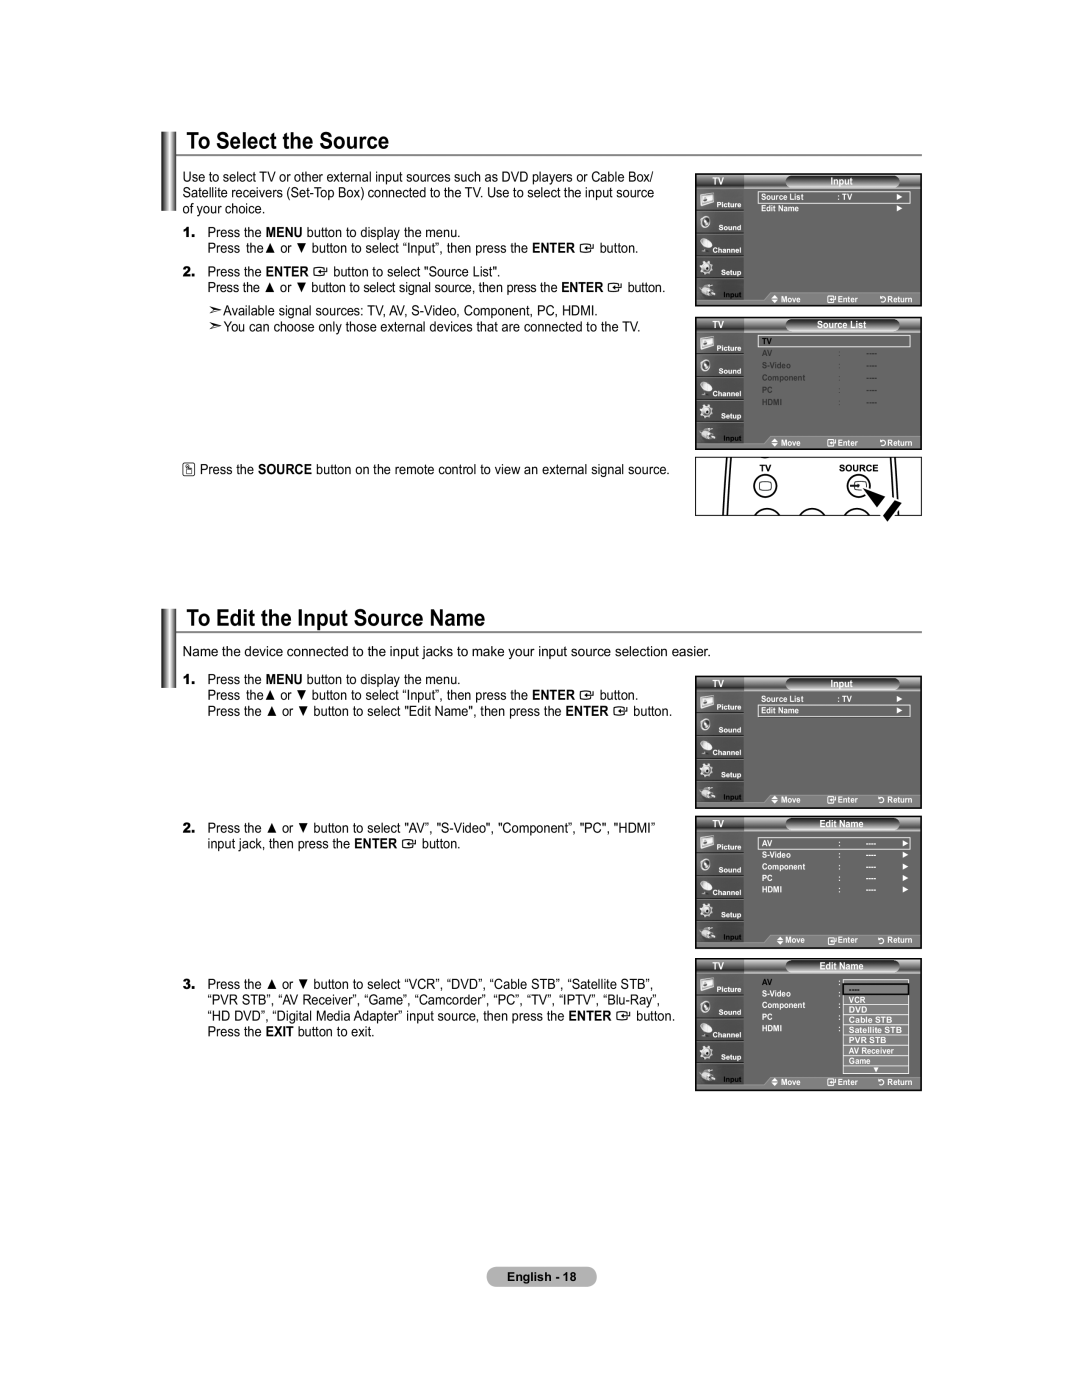 Samsung 451 user manual To Select the Source, To Edit the Input Source Name, Enter 